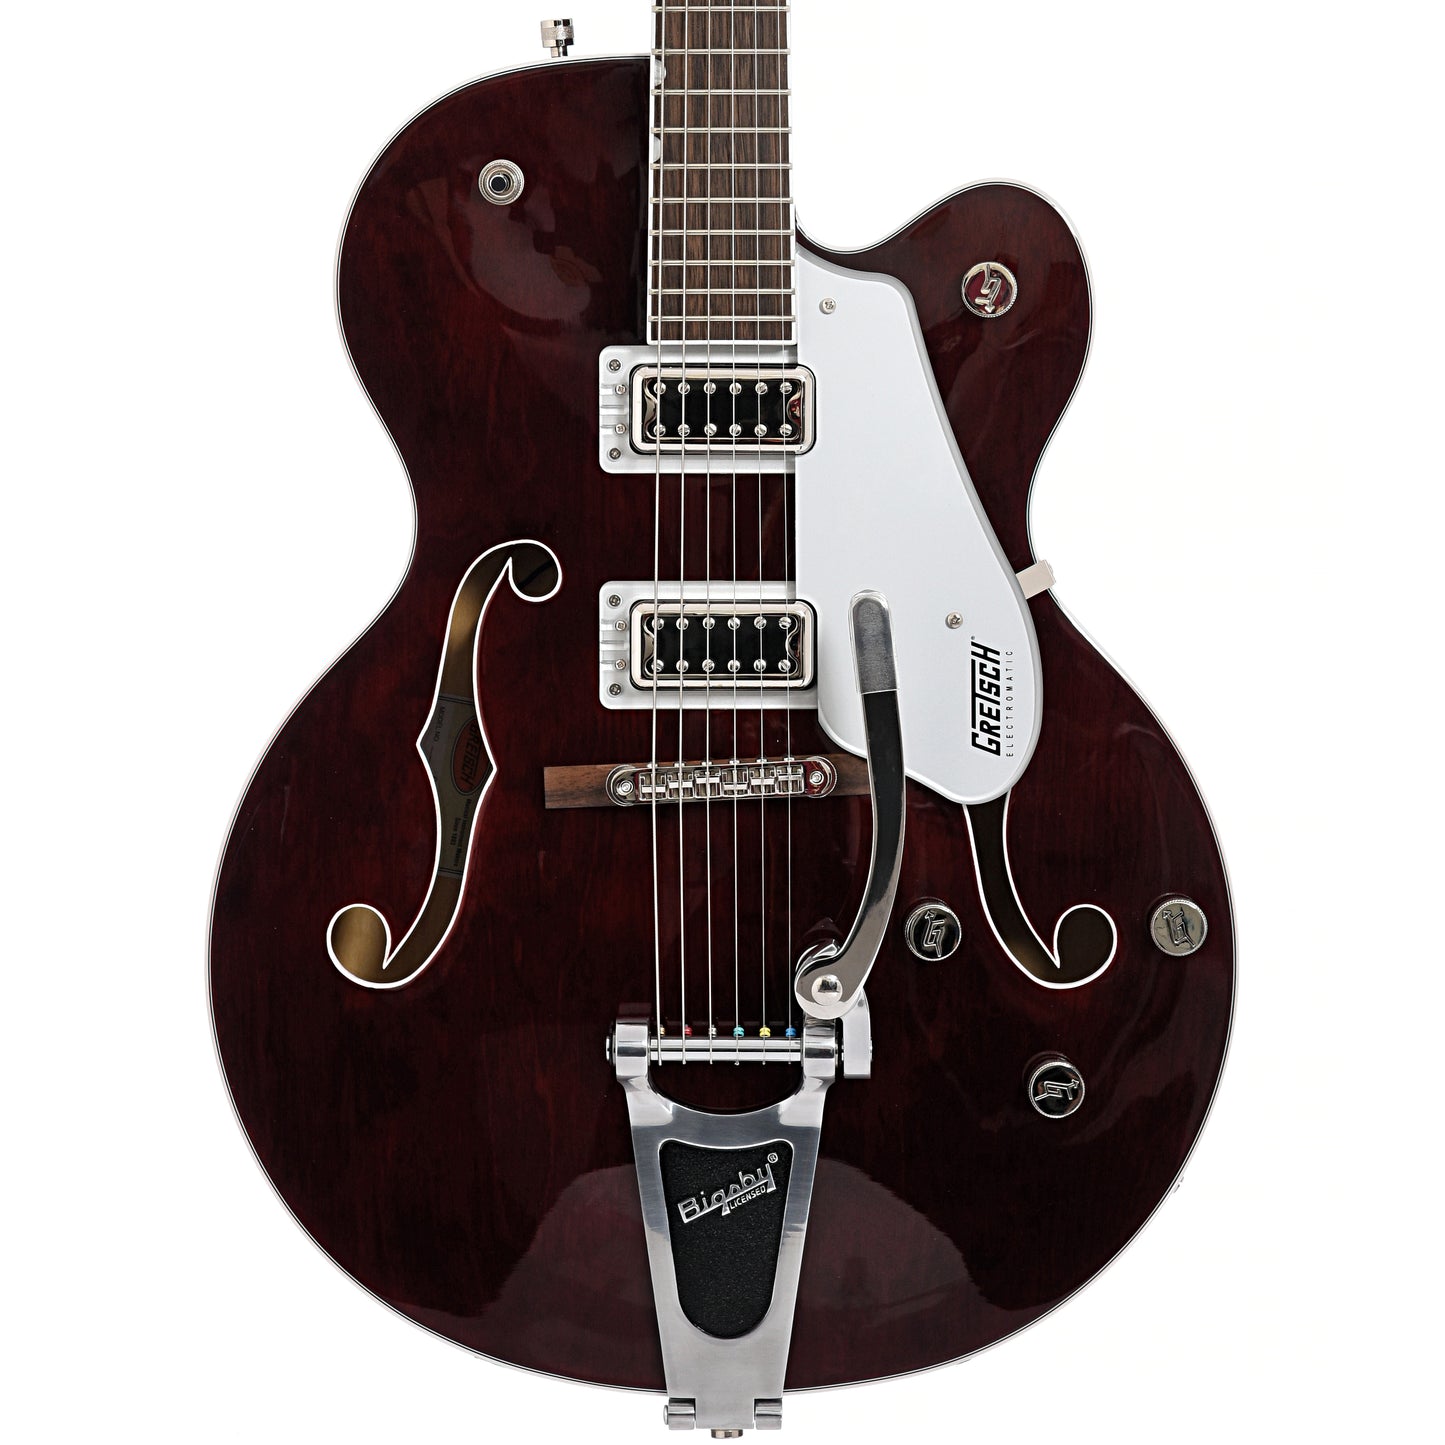 Image 2 of Gretsch G5420T Electromatic Classic Hollow Body Single Cut with Bigbsy, Walnut Stain- SKU# G5420T-WLNT : Product Type Hollow Body Electric Guitars : Elderly Instruments